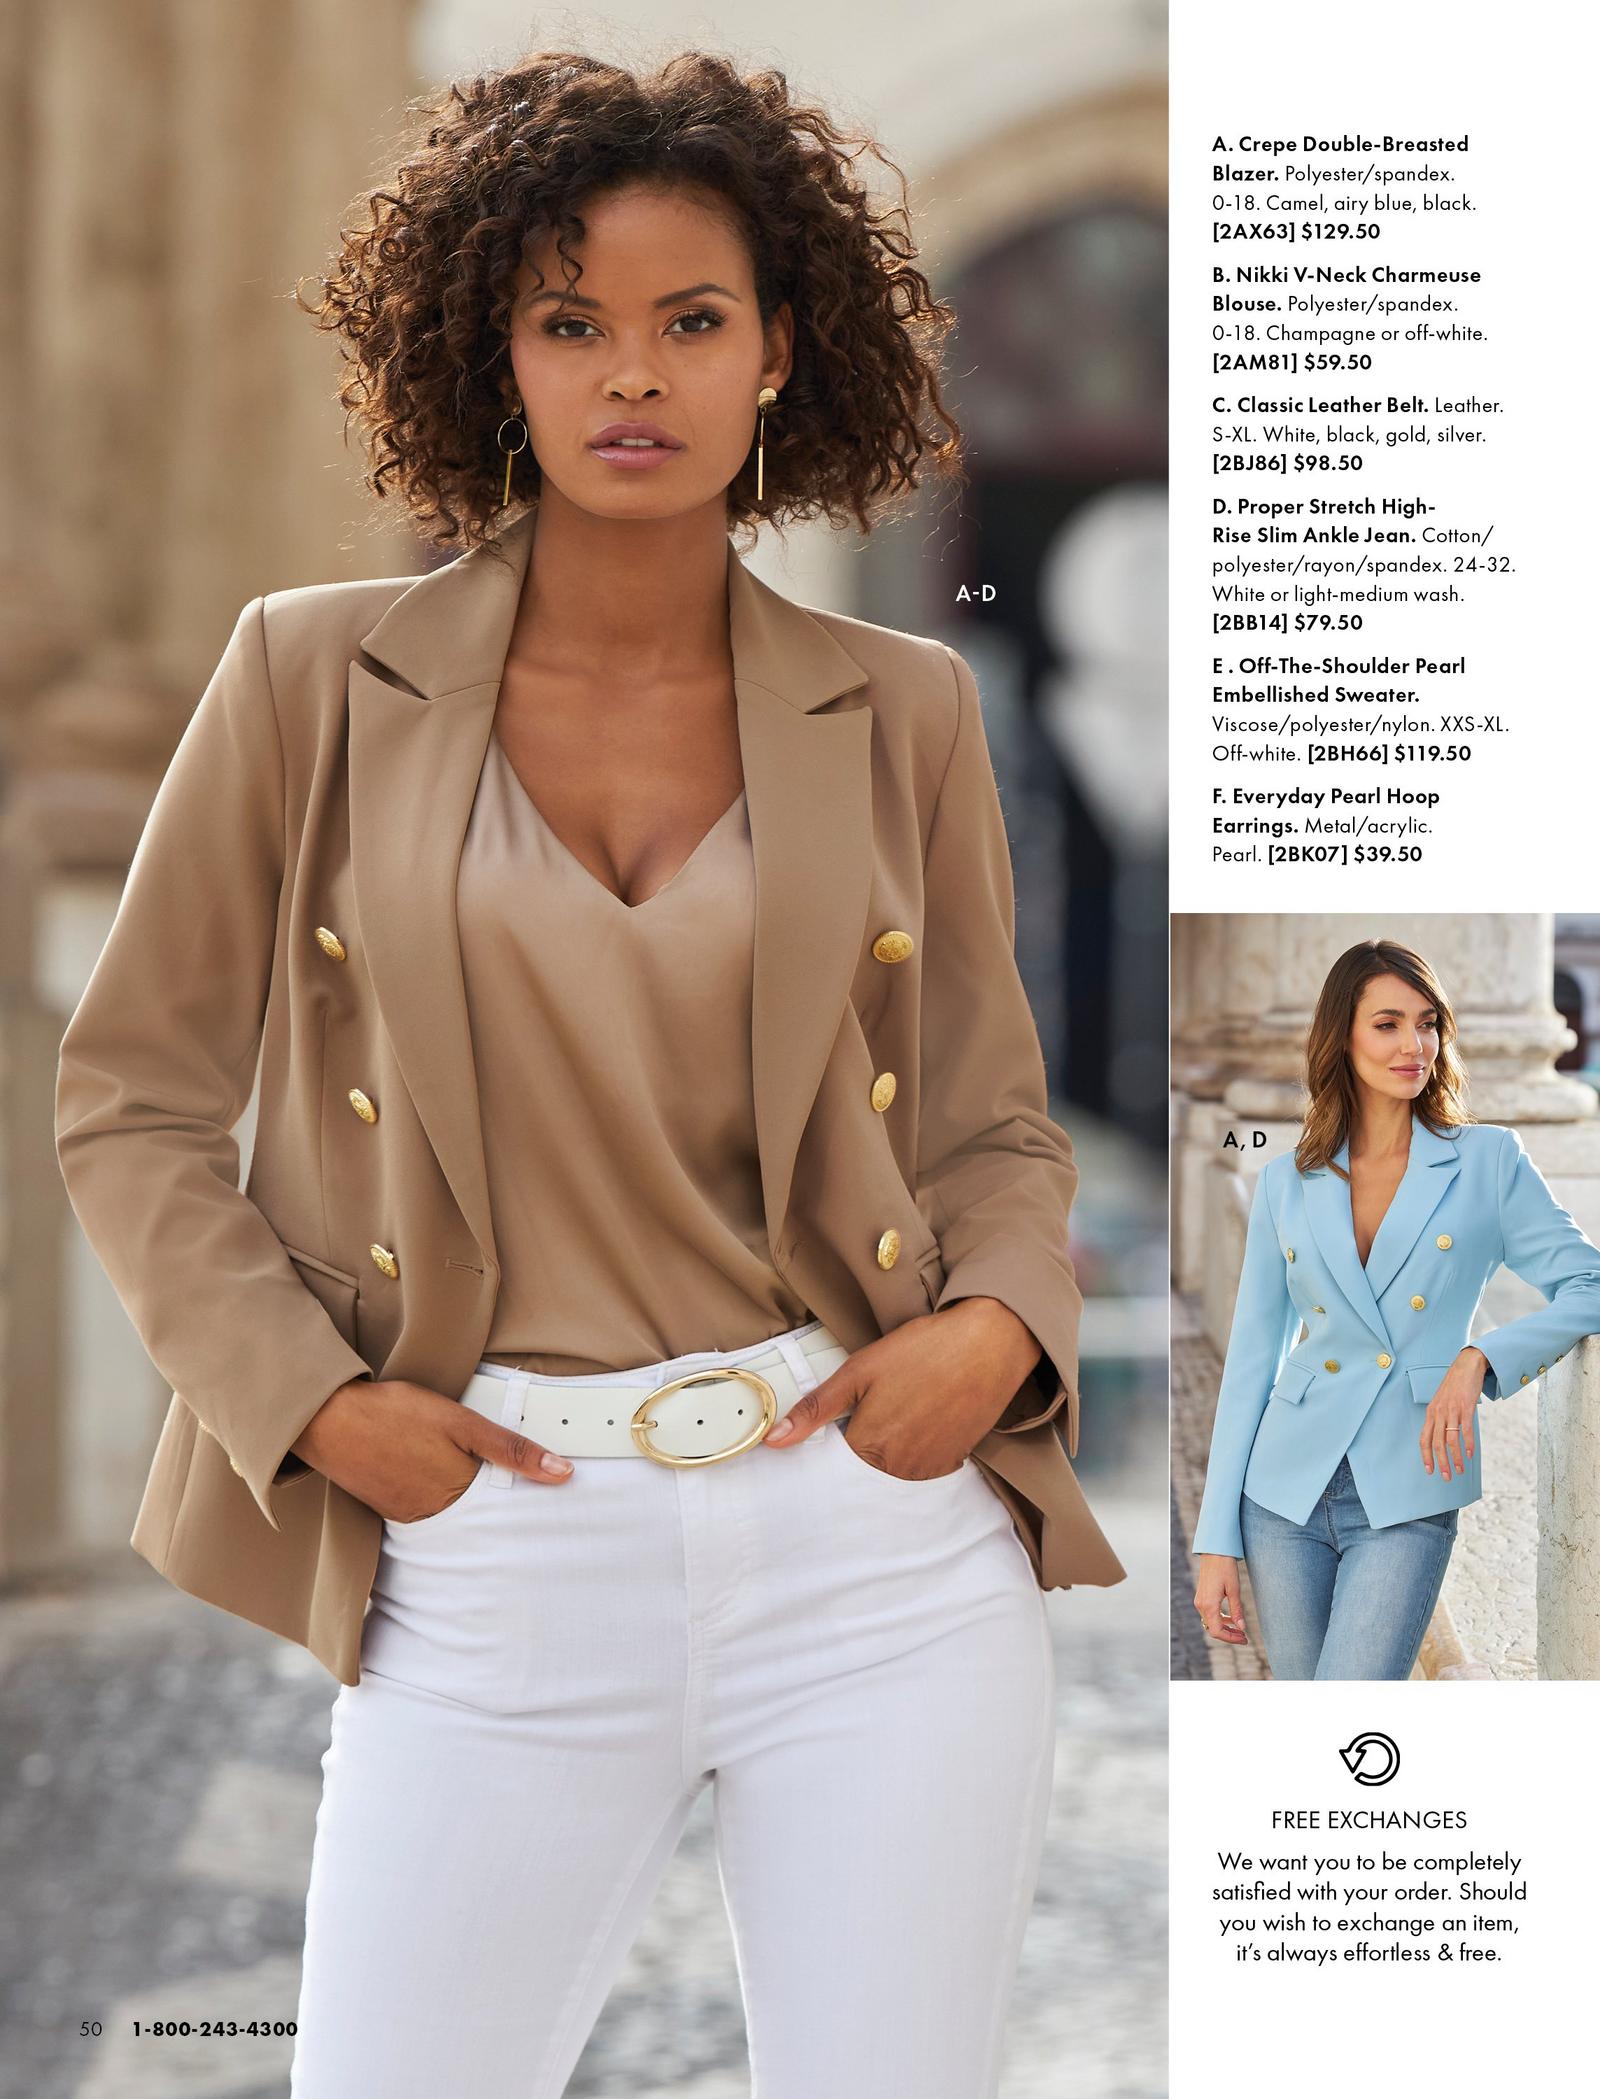 left model wearing a camel colored blazer, camel colored v-neck charmeuse blouse, white belt, and white jeans. right model wearing a light blue blazer and light wash jeans.